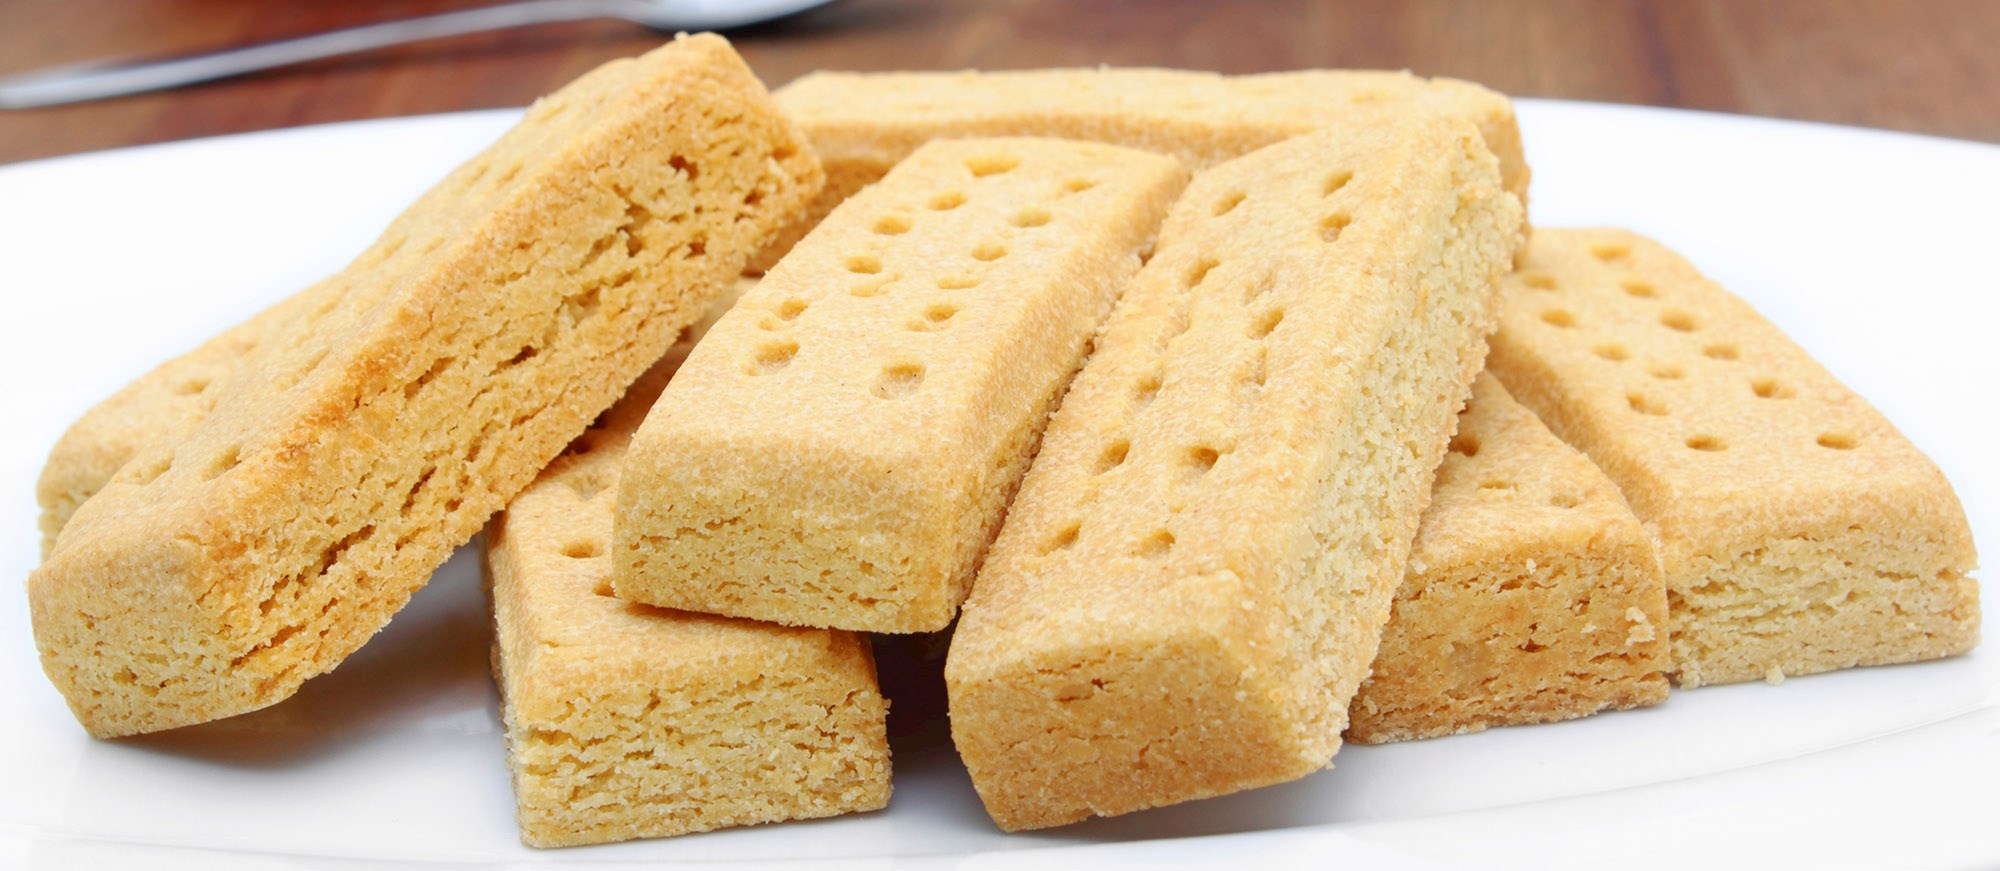 what is the difference between scottish shortbread and regular shortbread